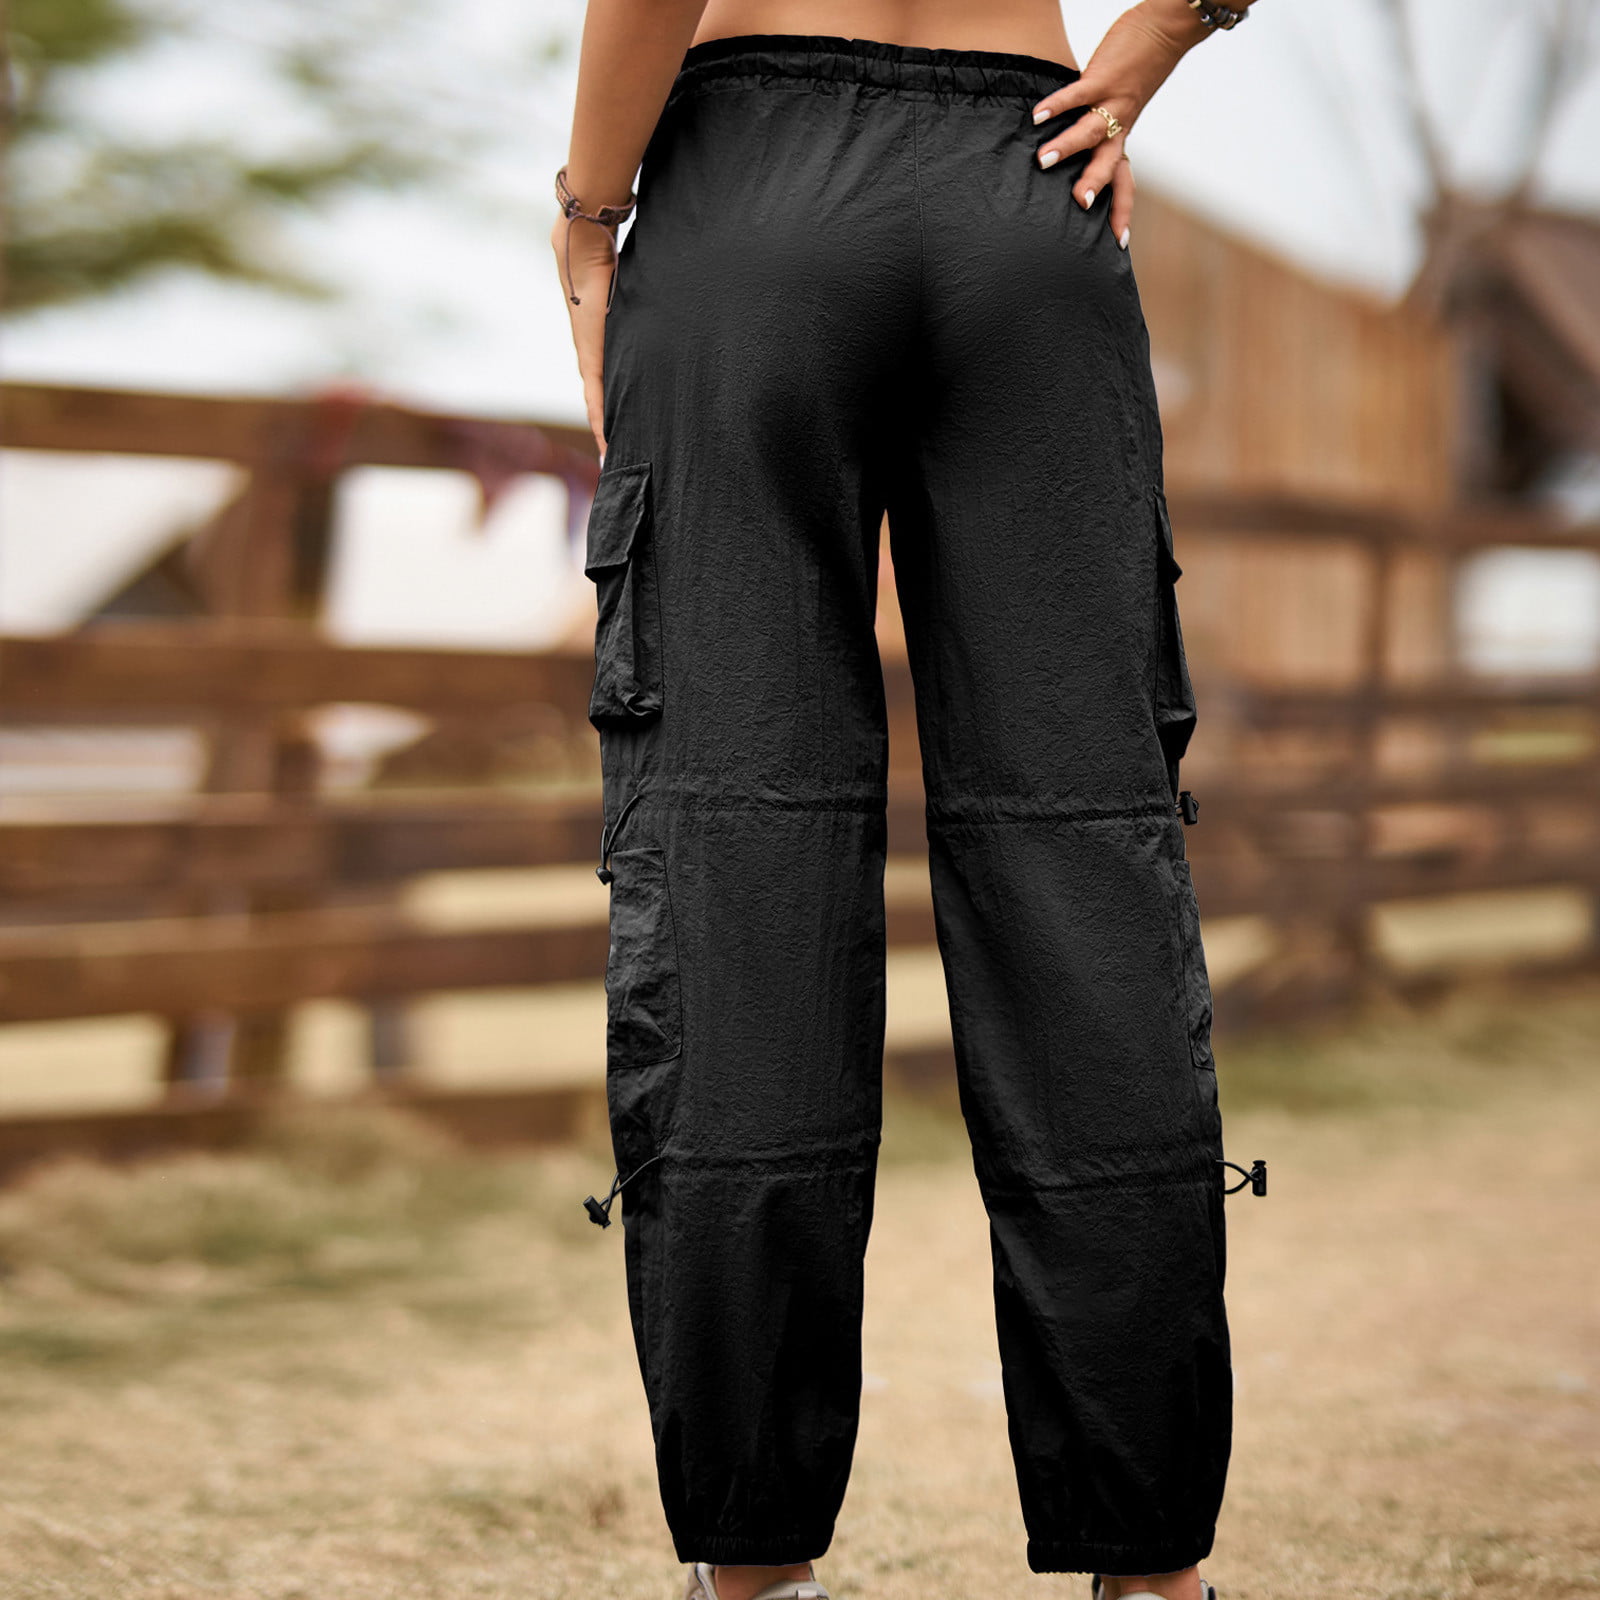 Cargo Pants Women Casual Loose Fit Crinch Bottom Workout Pants